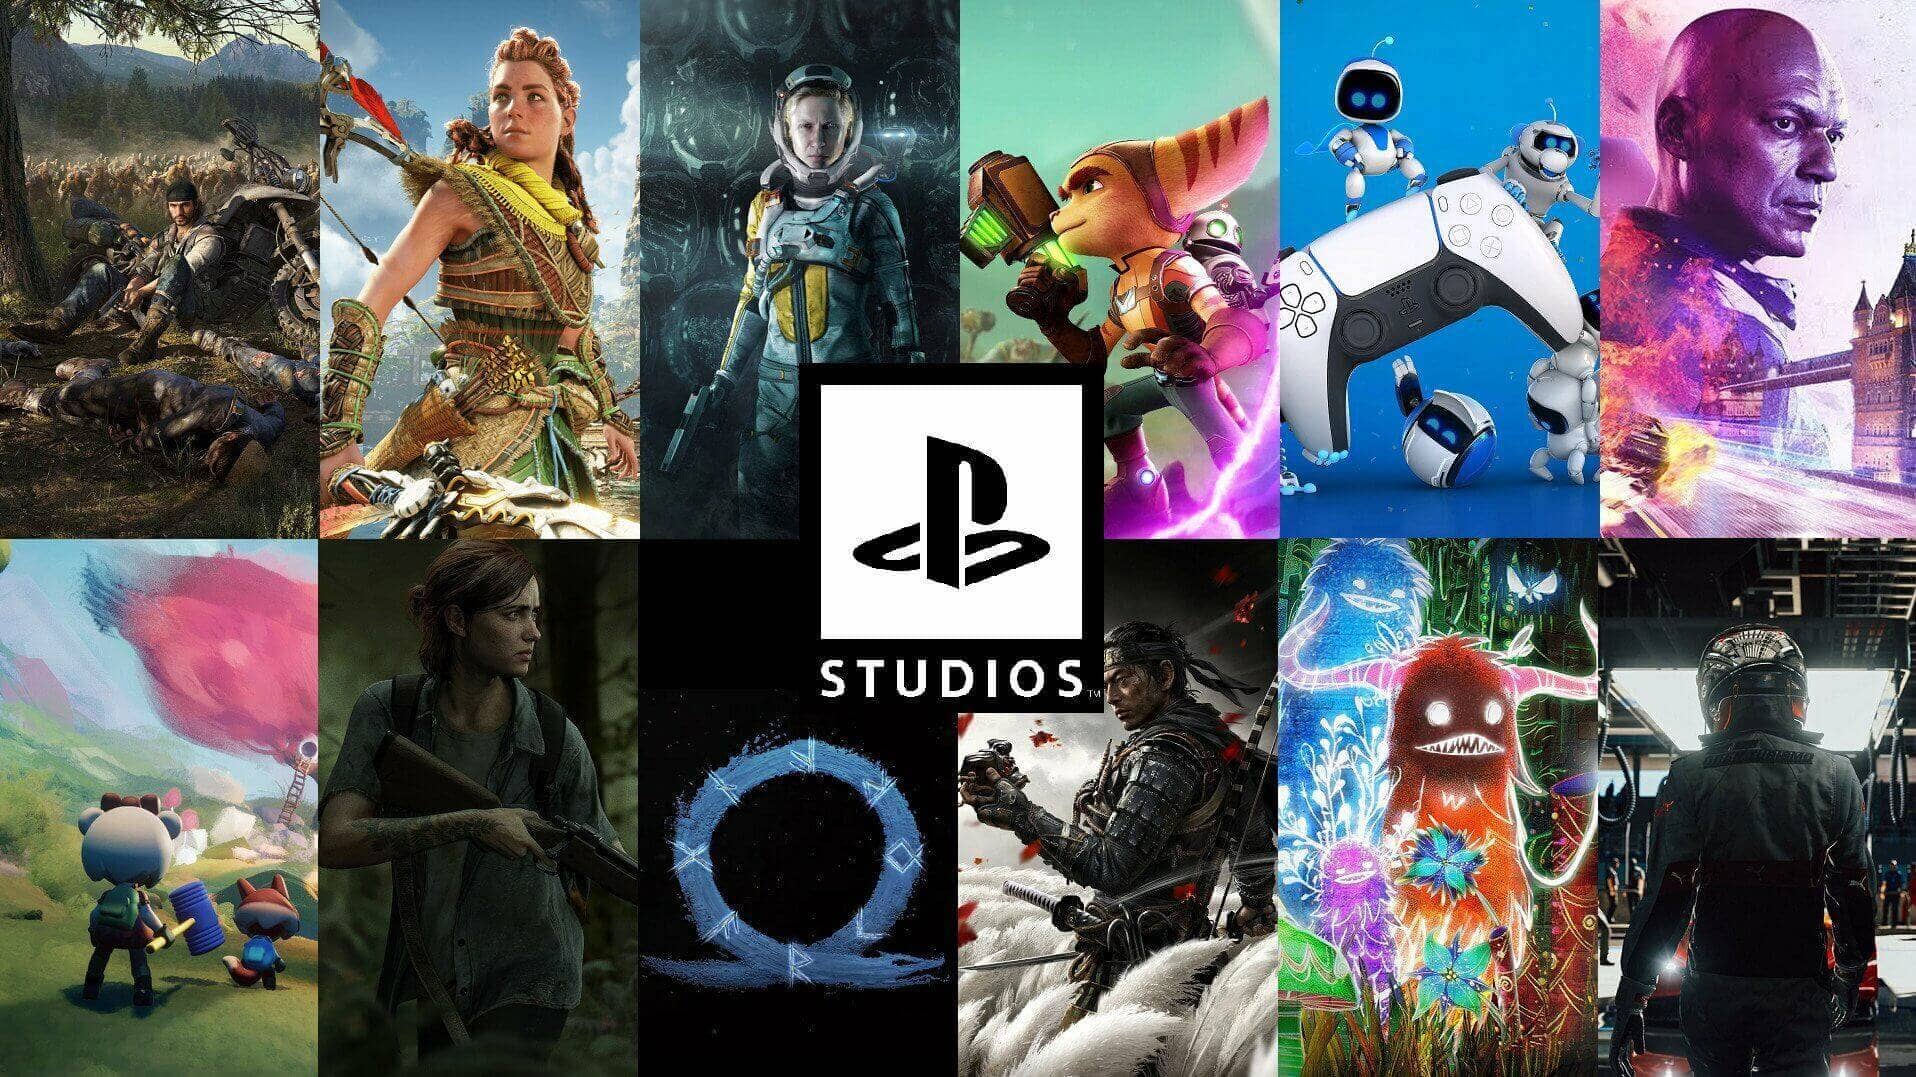 Sony is slowly pushing its exclusives to PC, but what about the high price tag?